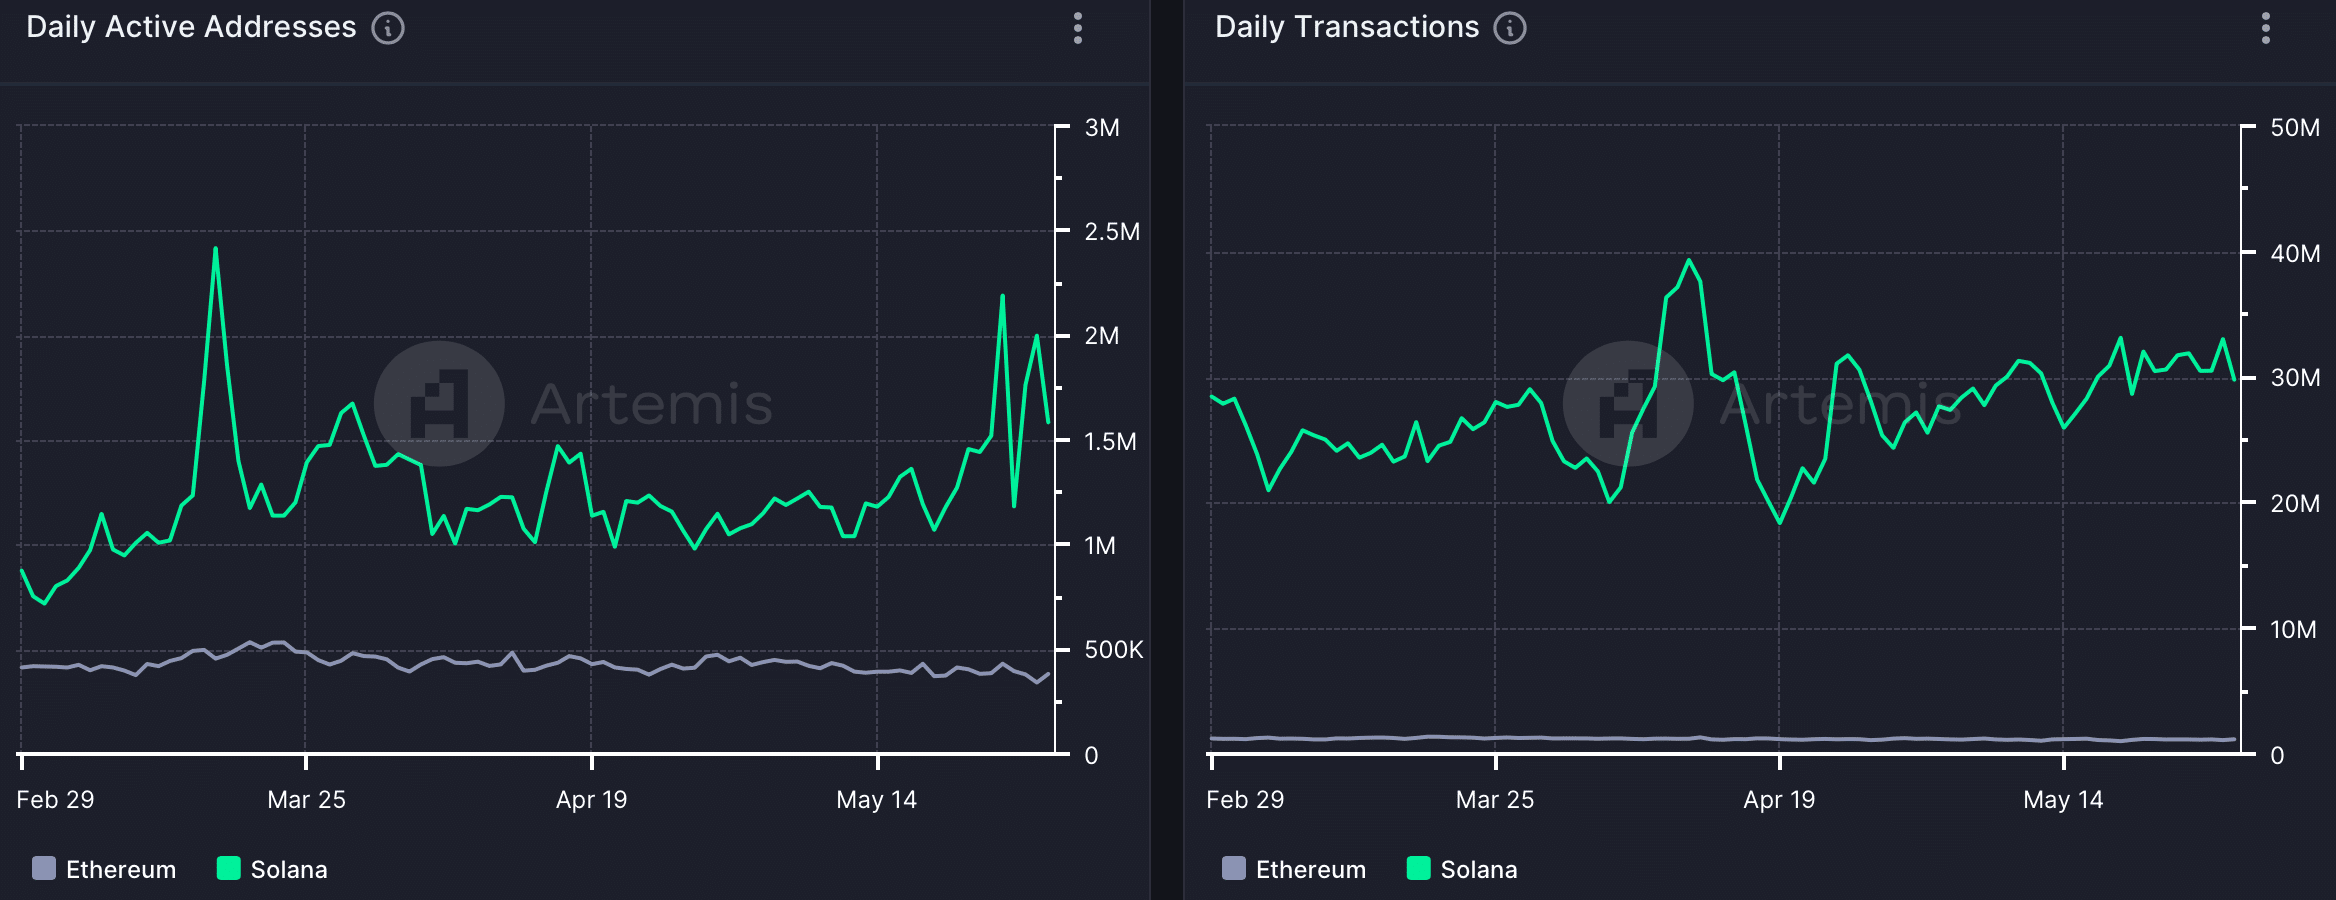 Solana dominated Ethereum in terms of network activity